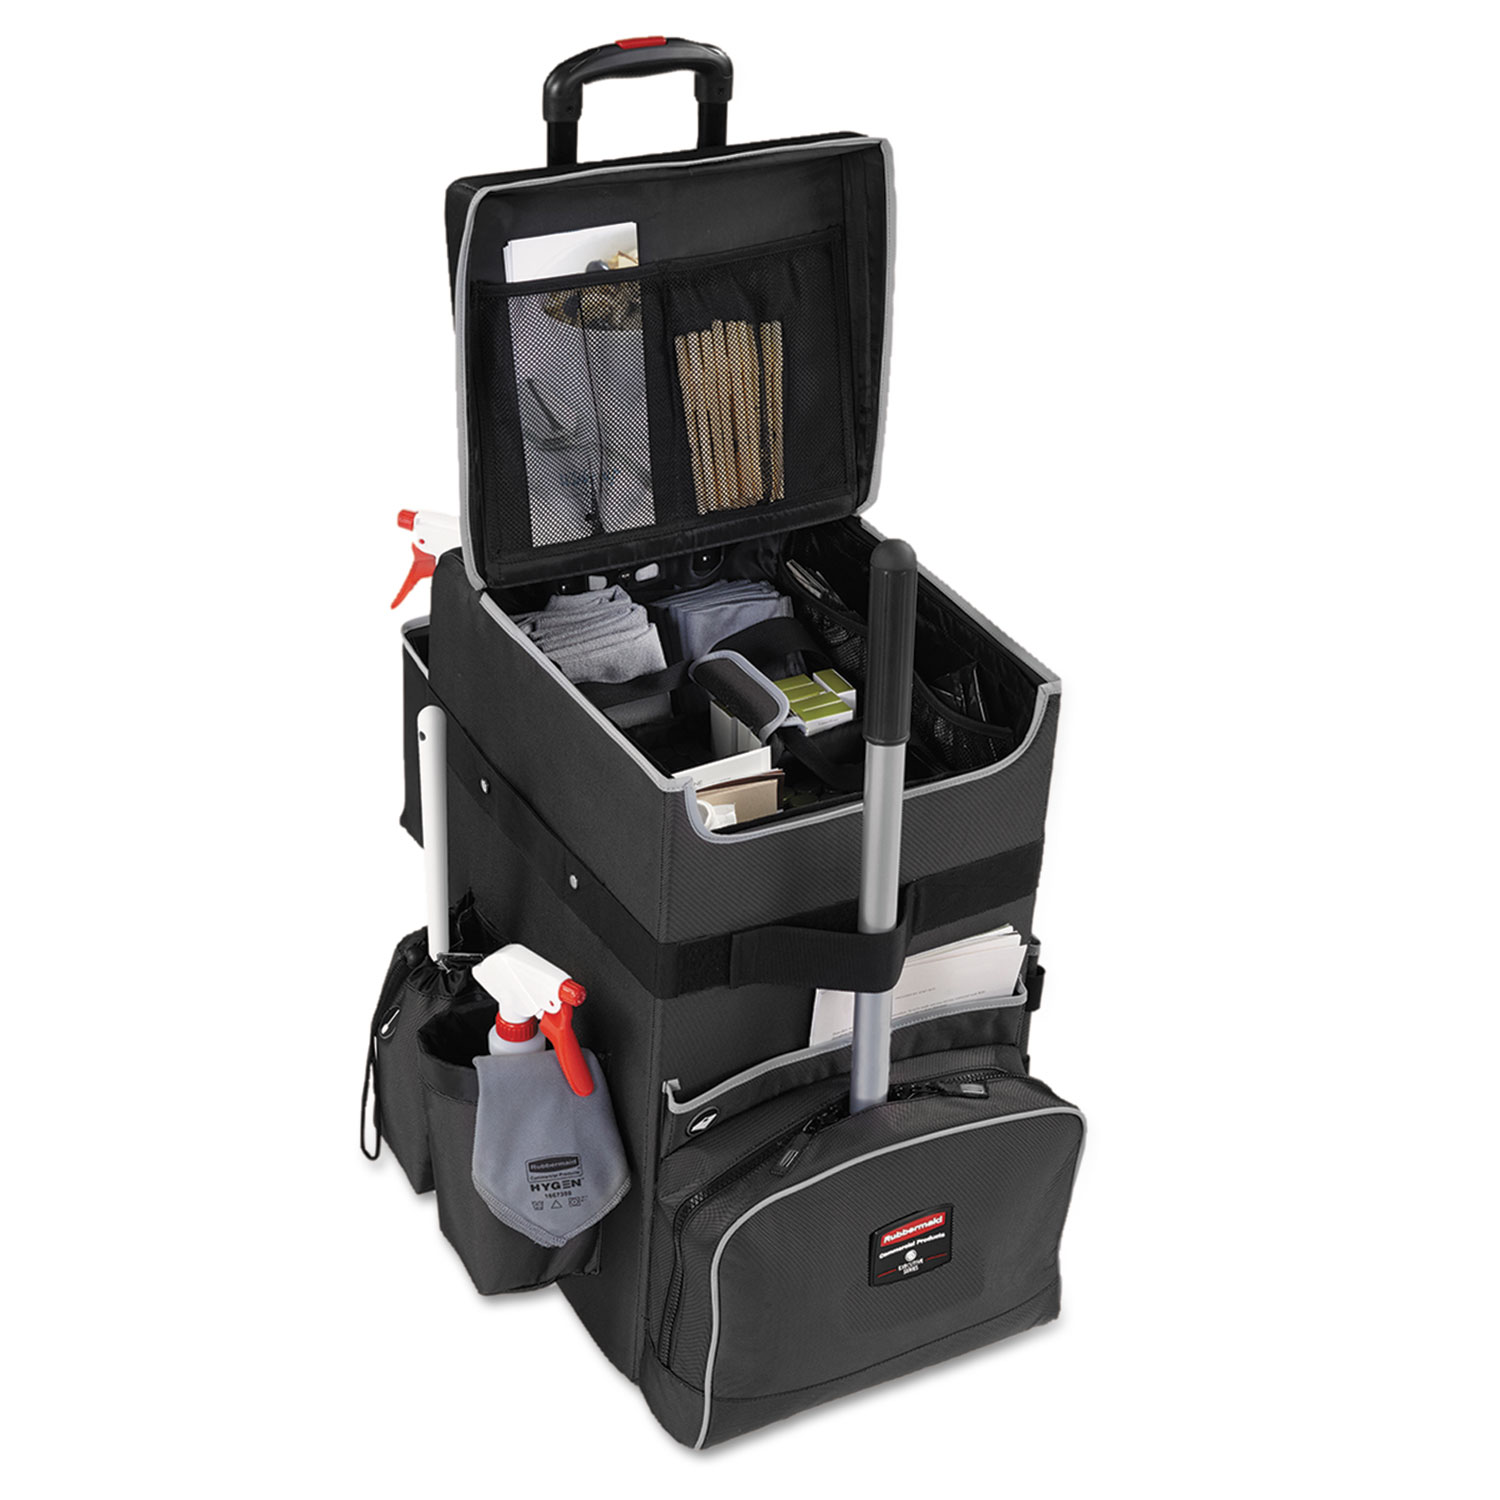  Rubbermaid Commercial 1902465 Executive Quick Cart, Large, 14.25w x 16.5d x 25h, Dark Gray (RCP1902465) 